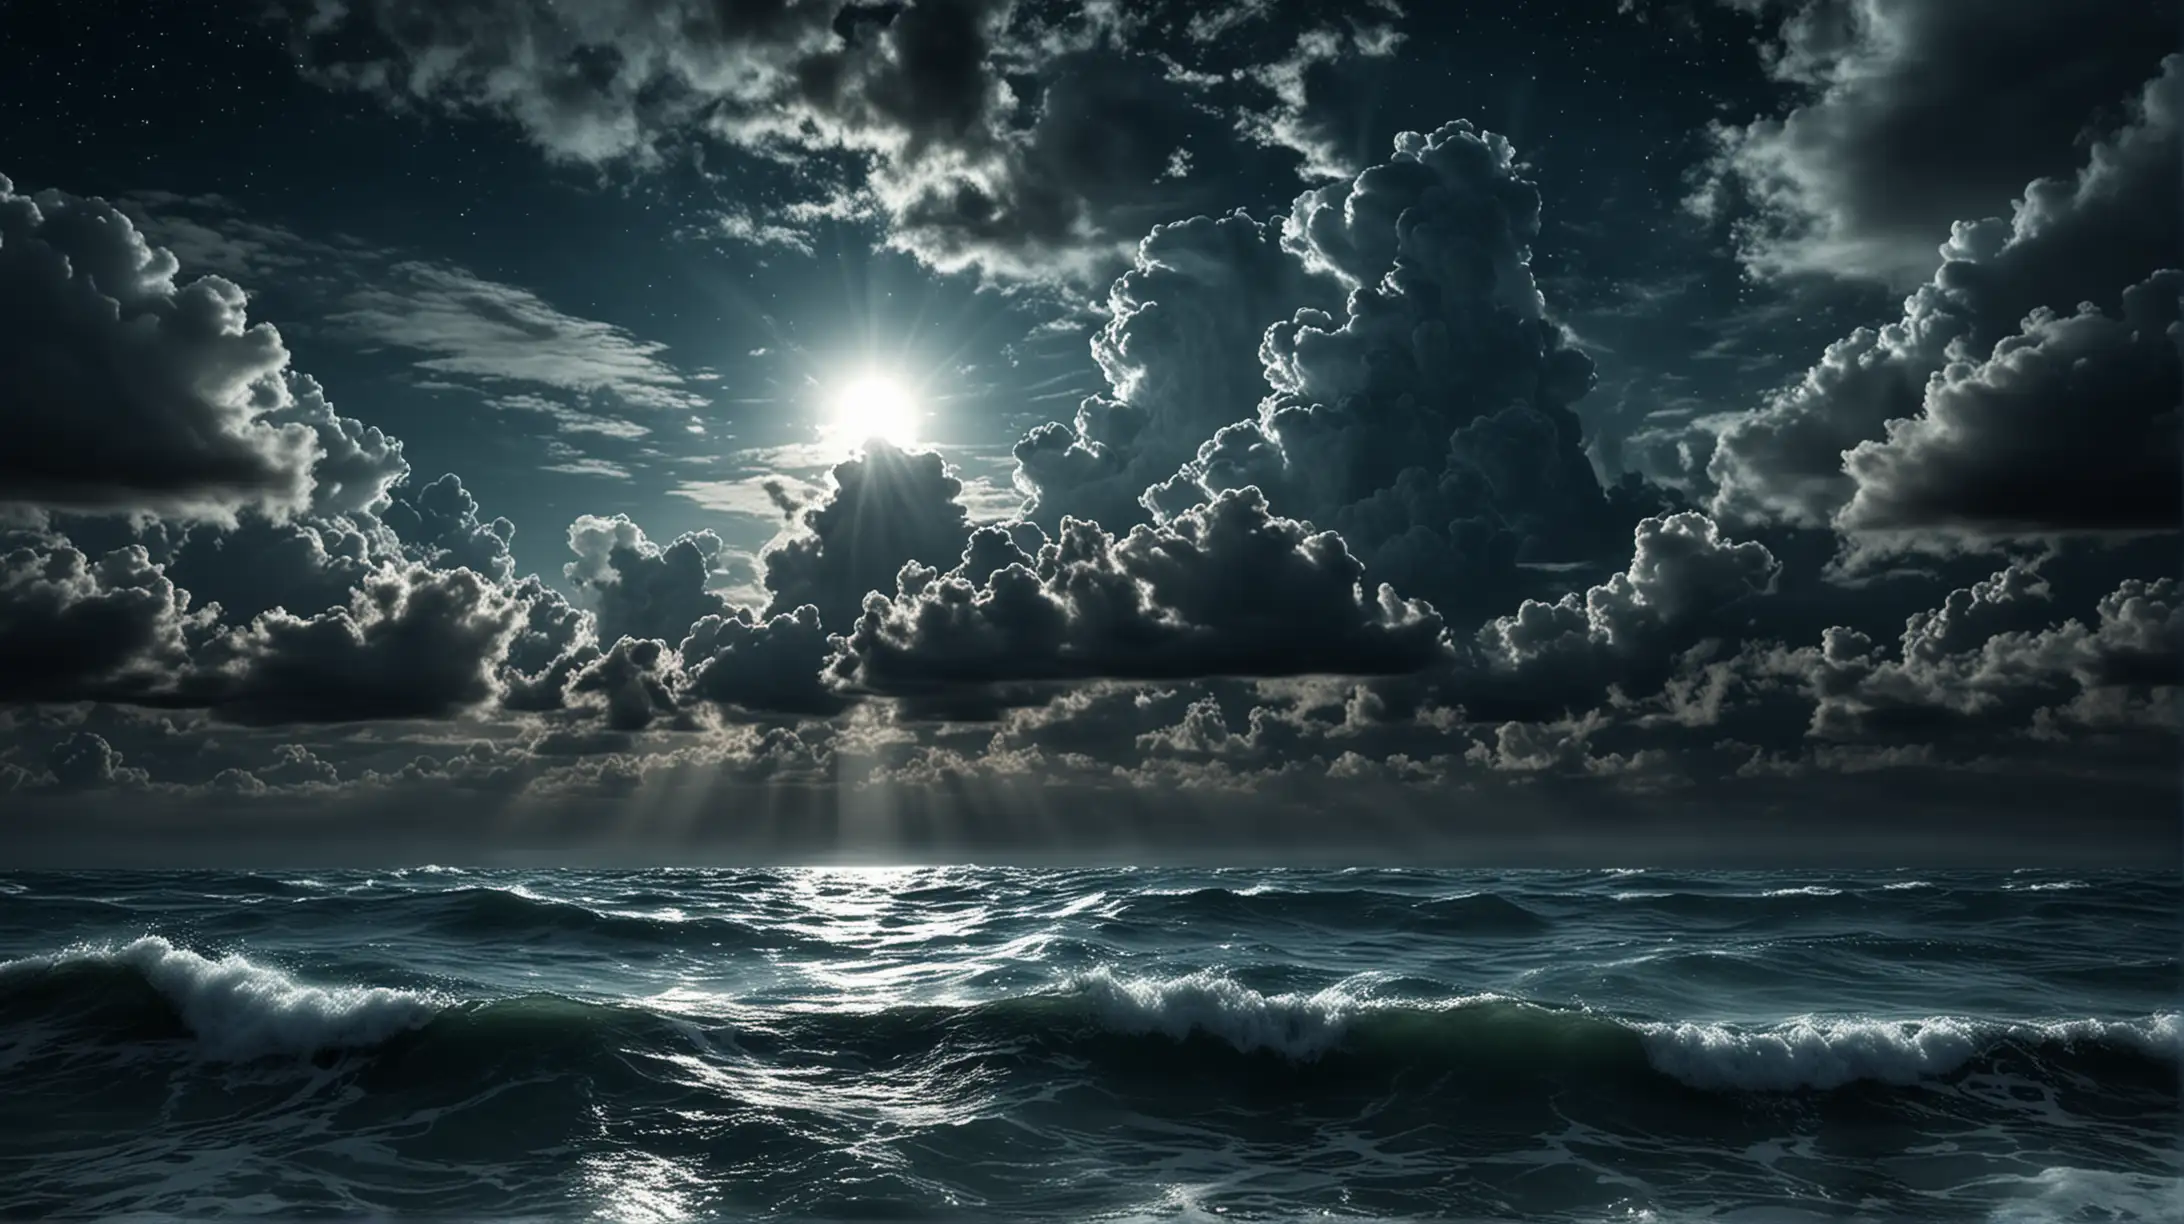 create an image that depicts a body of ocean with clouds over the surface with night time effects
